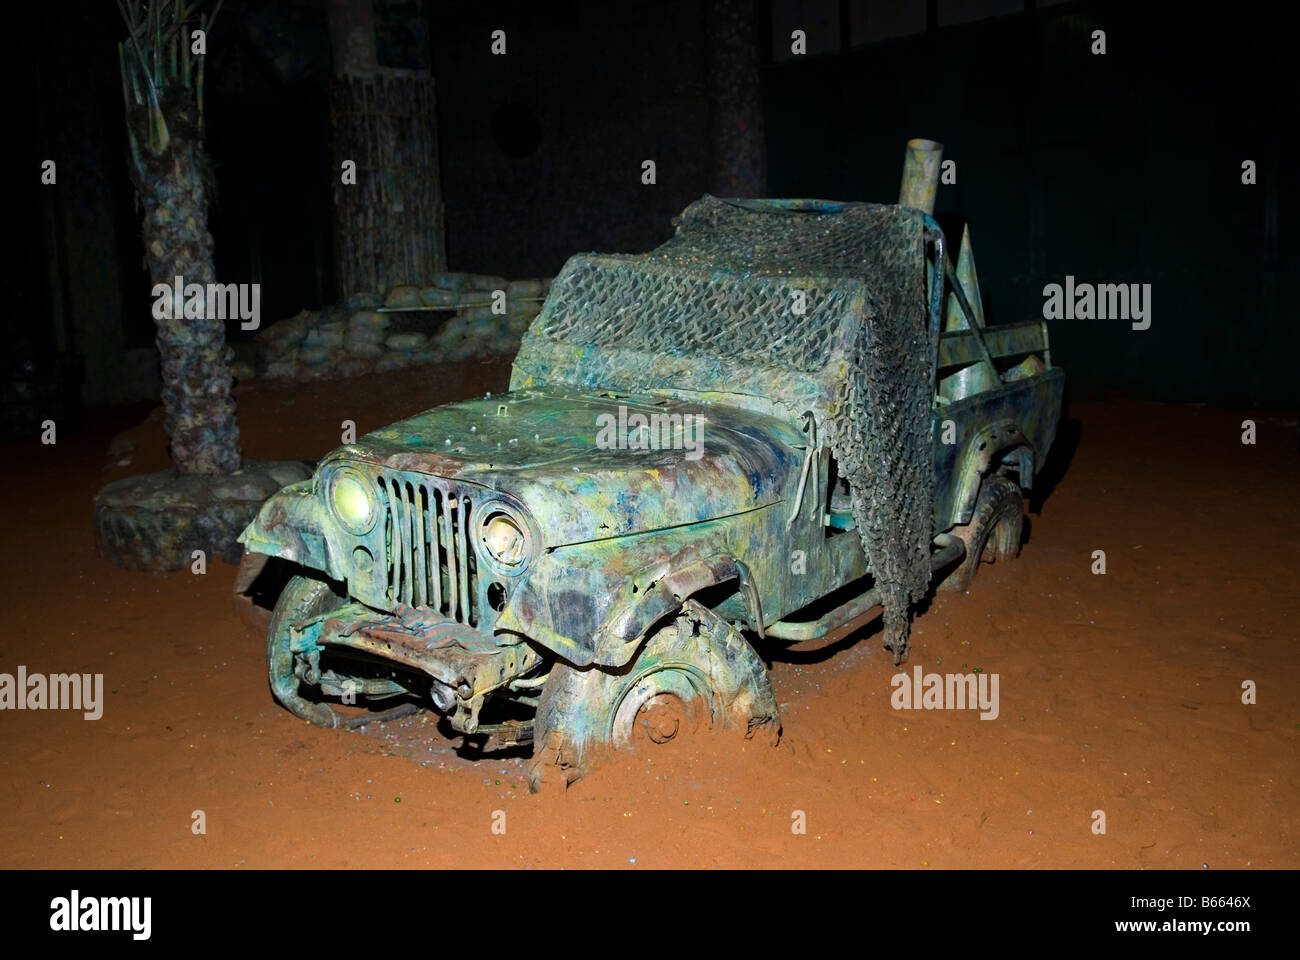 Destroyed army jeep vehicle used as prop in a paint ball field Stock Photo